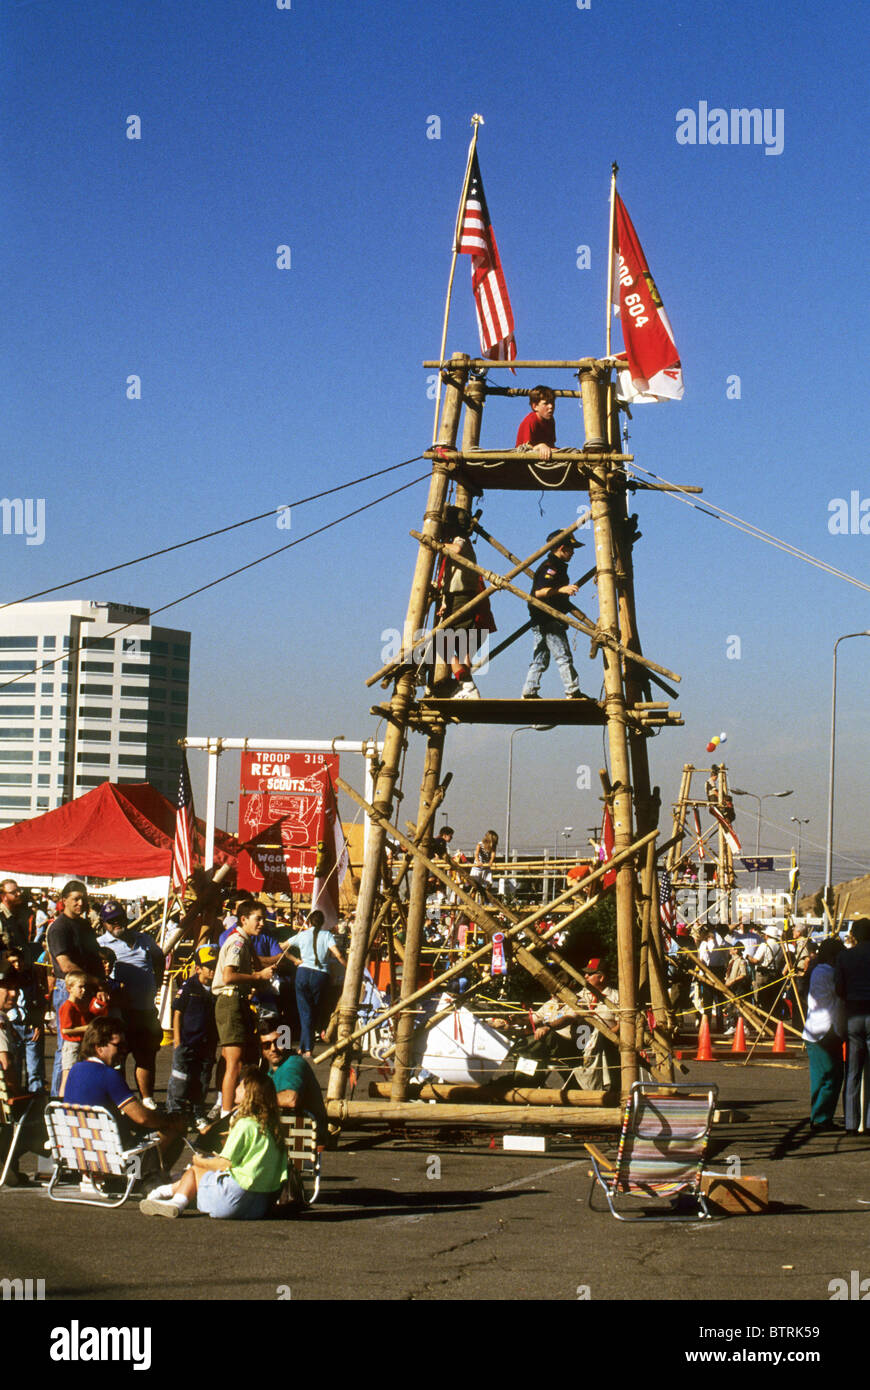 scout-o-rama boy scouts of America wooden tower lashing rope build skill  demonstrate ability flag safe safety bonding Stock Photo - Alamy